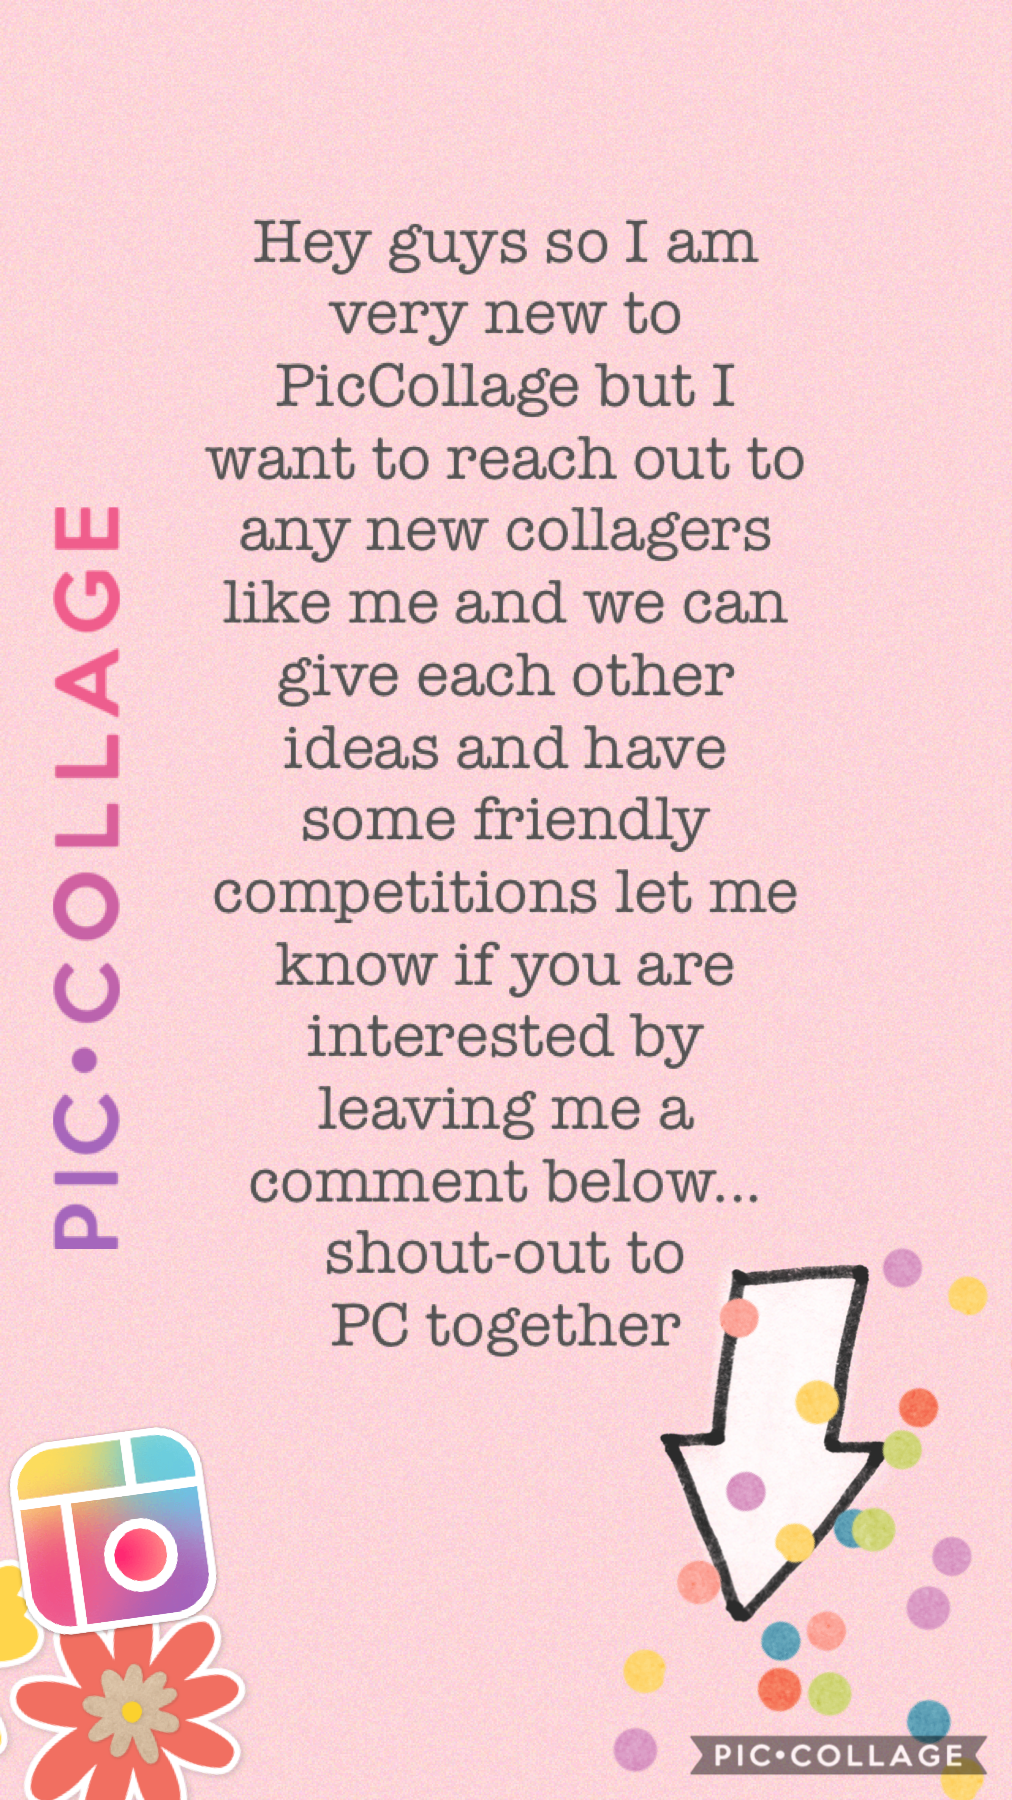 I would love to make a friendly community alongside @ pctogether